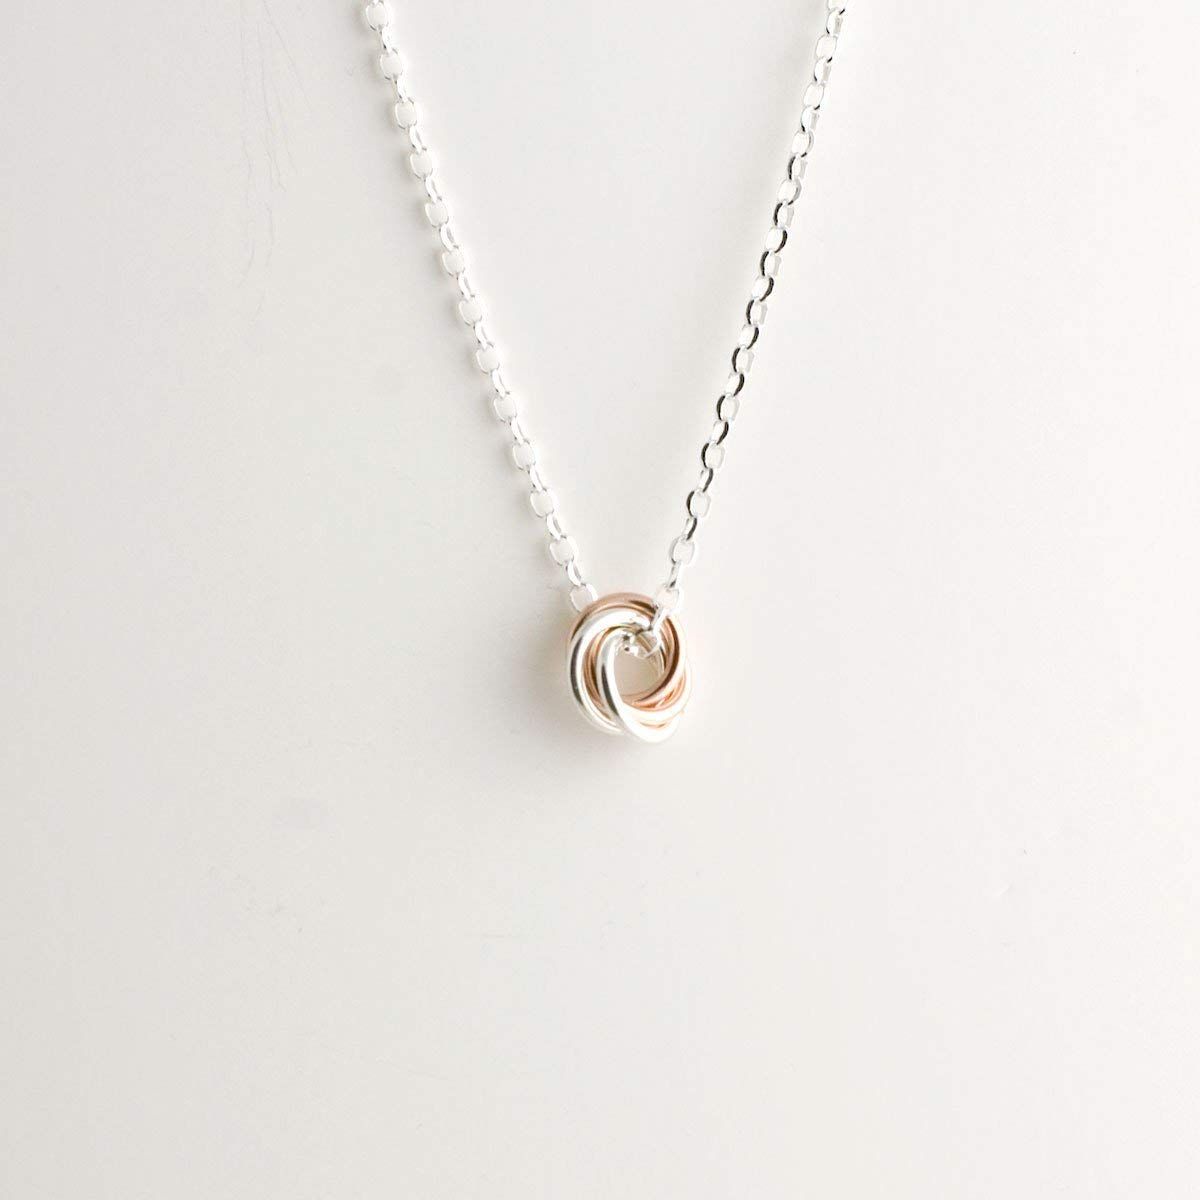 Cheap Necklace Love Knot, Find Necklace Love Knot Deals On Line At Throughout Most Recent Shimmering Knot Locket Element Necklaces (View 5 of 25)